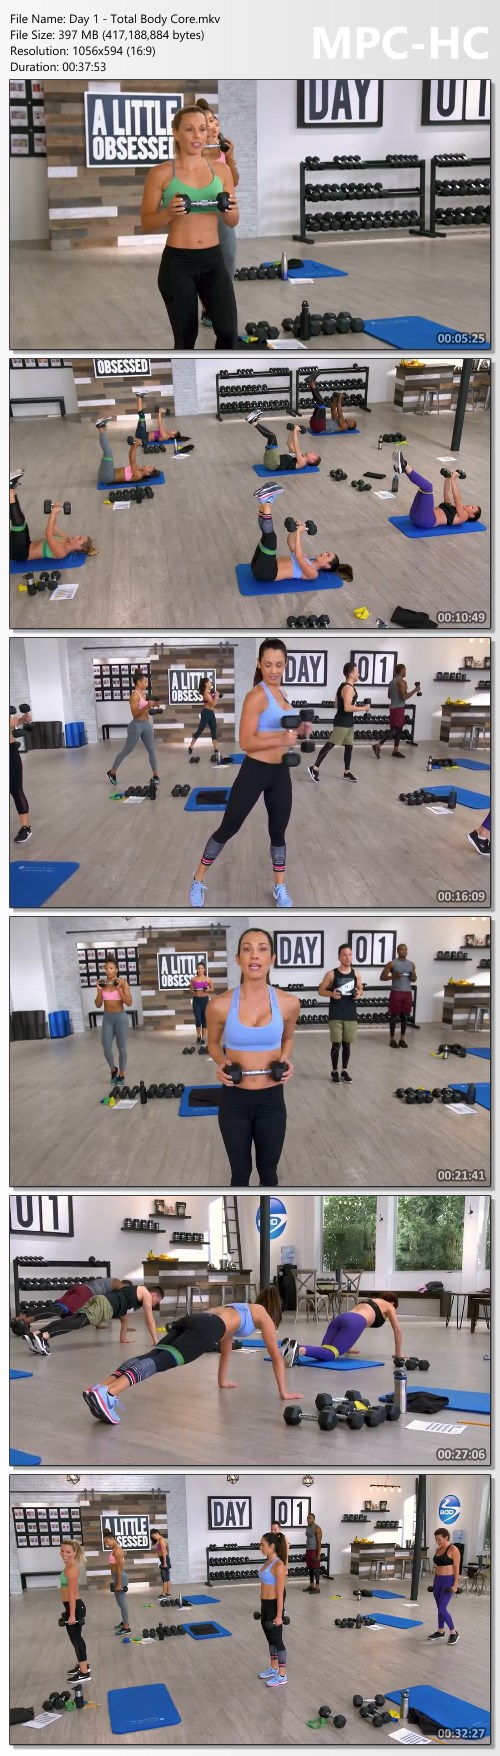 Beachbody - A Little Obsessed by Autumn Calabrese